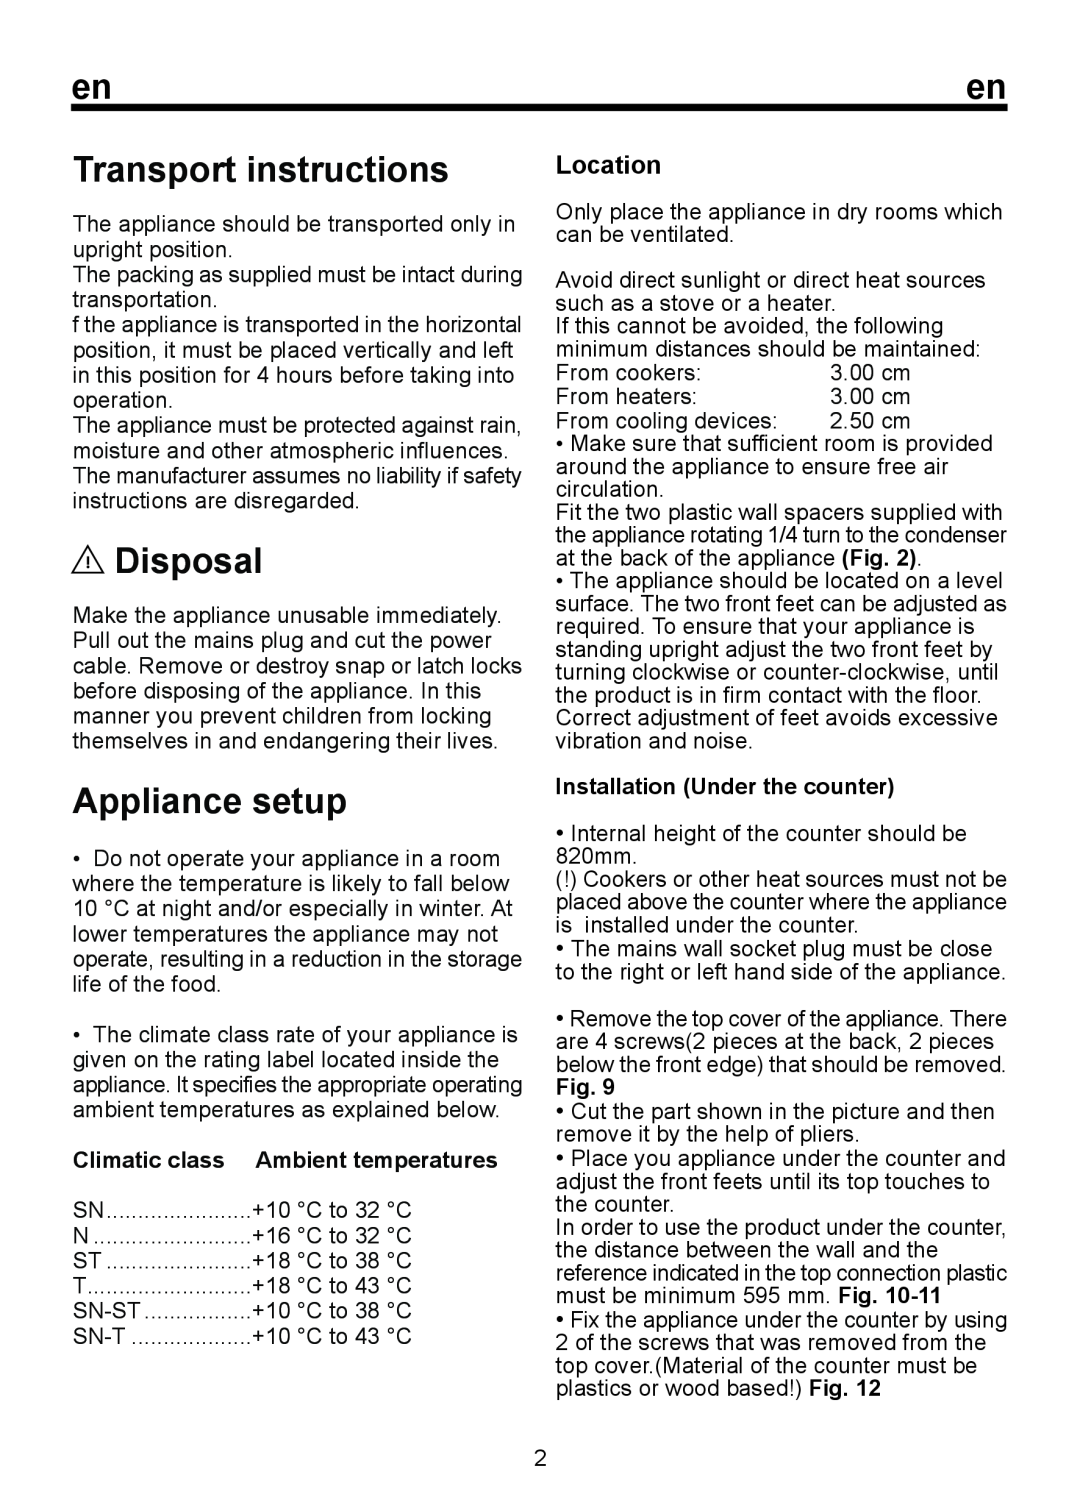 Smeg FA120A Transport instructions, Disposal, Appliance setup, Location, Climatic class, Installation Under the counter 